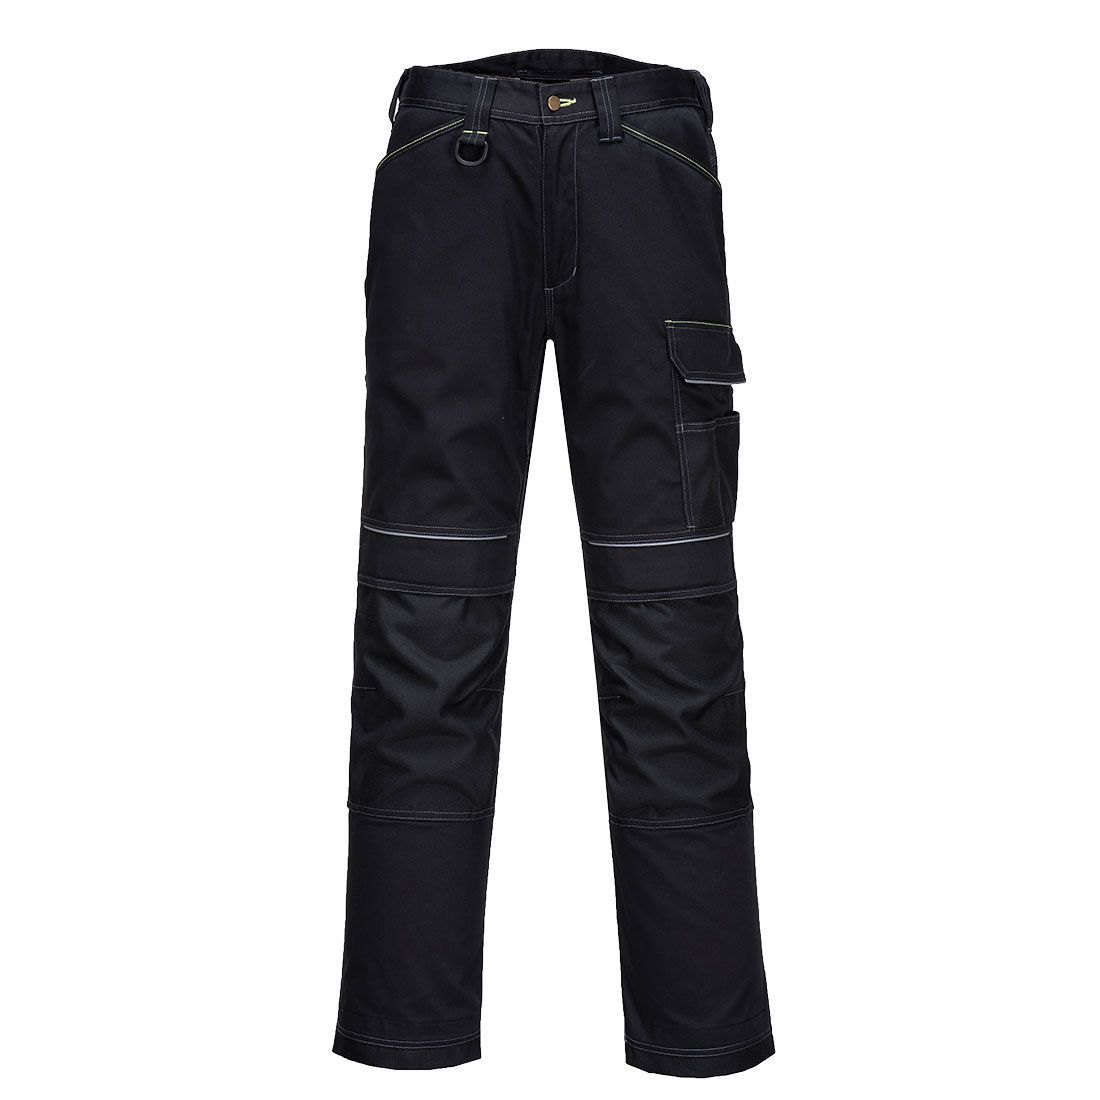 Portwest Work Trousers